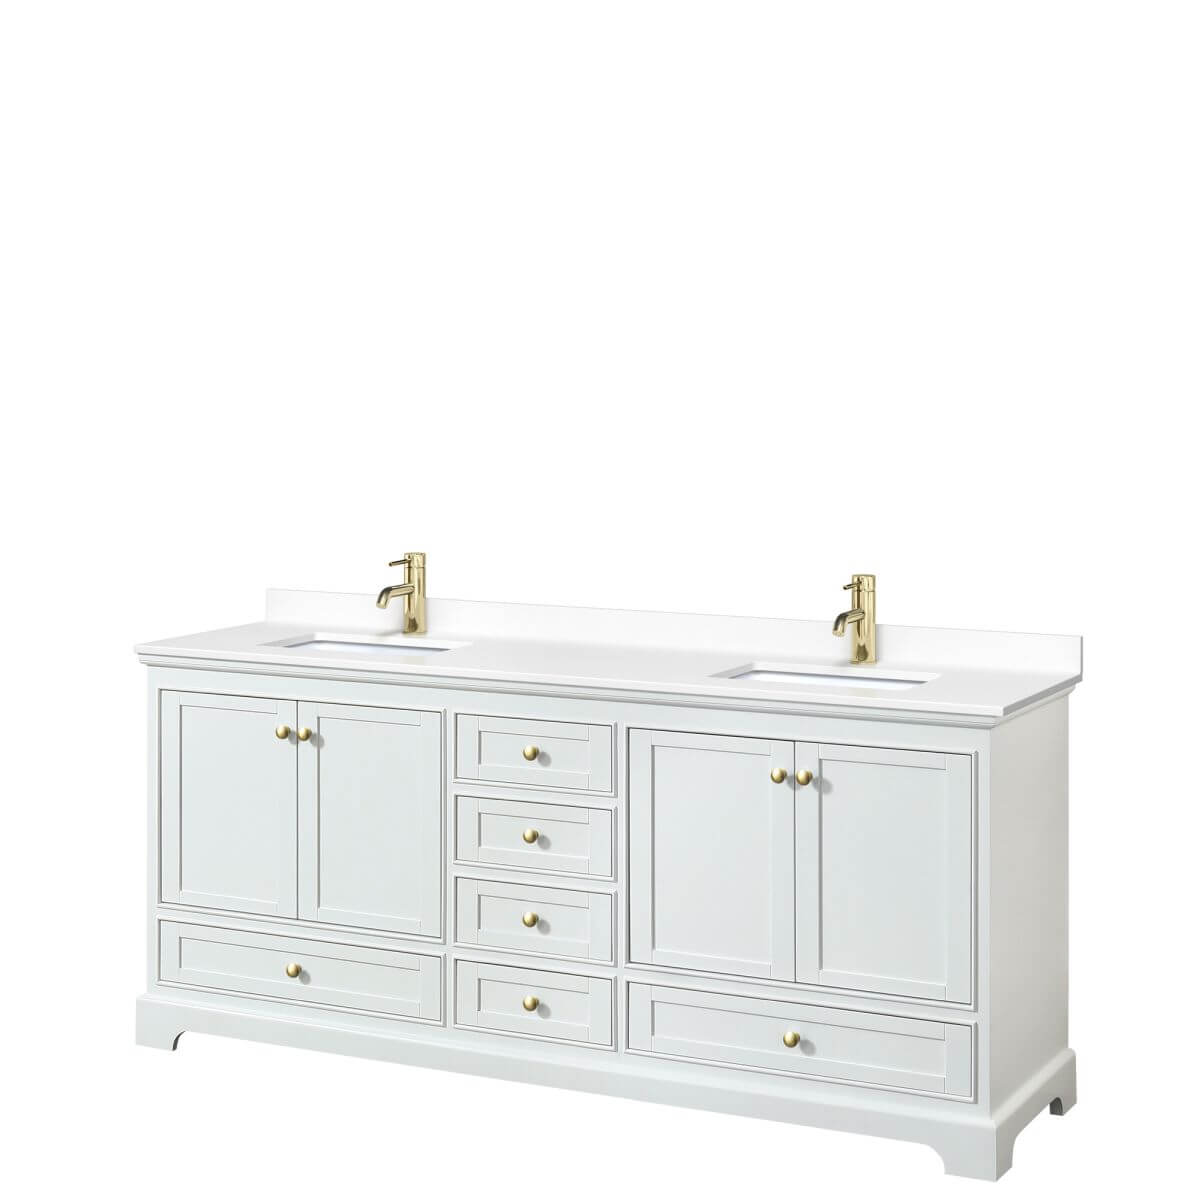 Wyndham Collection Deborah 80 inch Double Bathroom Vanity in White with White Cultured Marble Countertop, Undermount Square Sinks, Brushed Gold Trim and No Mirrors - WCS202080DWGWCUNSMXX